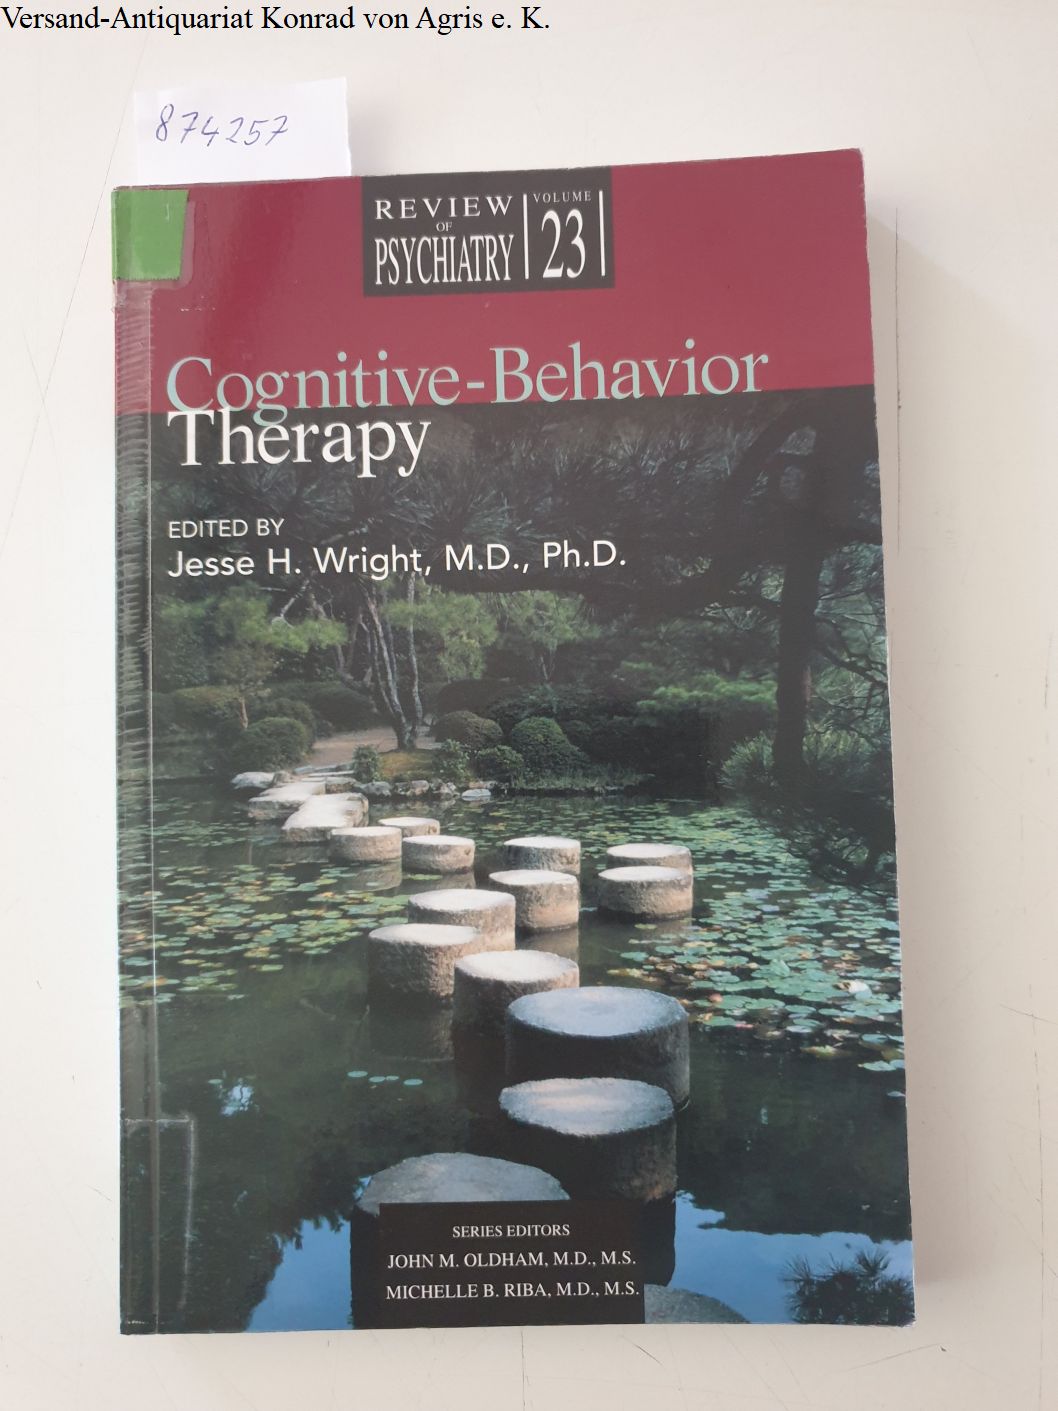 Cognitive-Behavior Therapy : Review of Psychiatry volume 23 : - Wright, Jesse H.